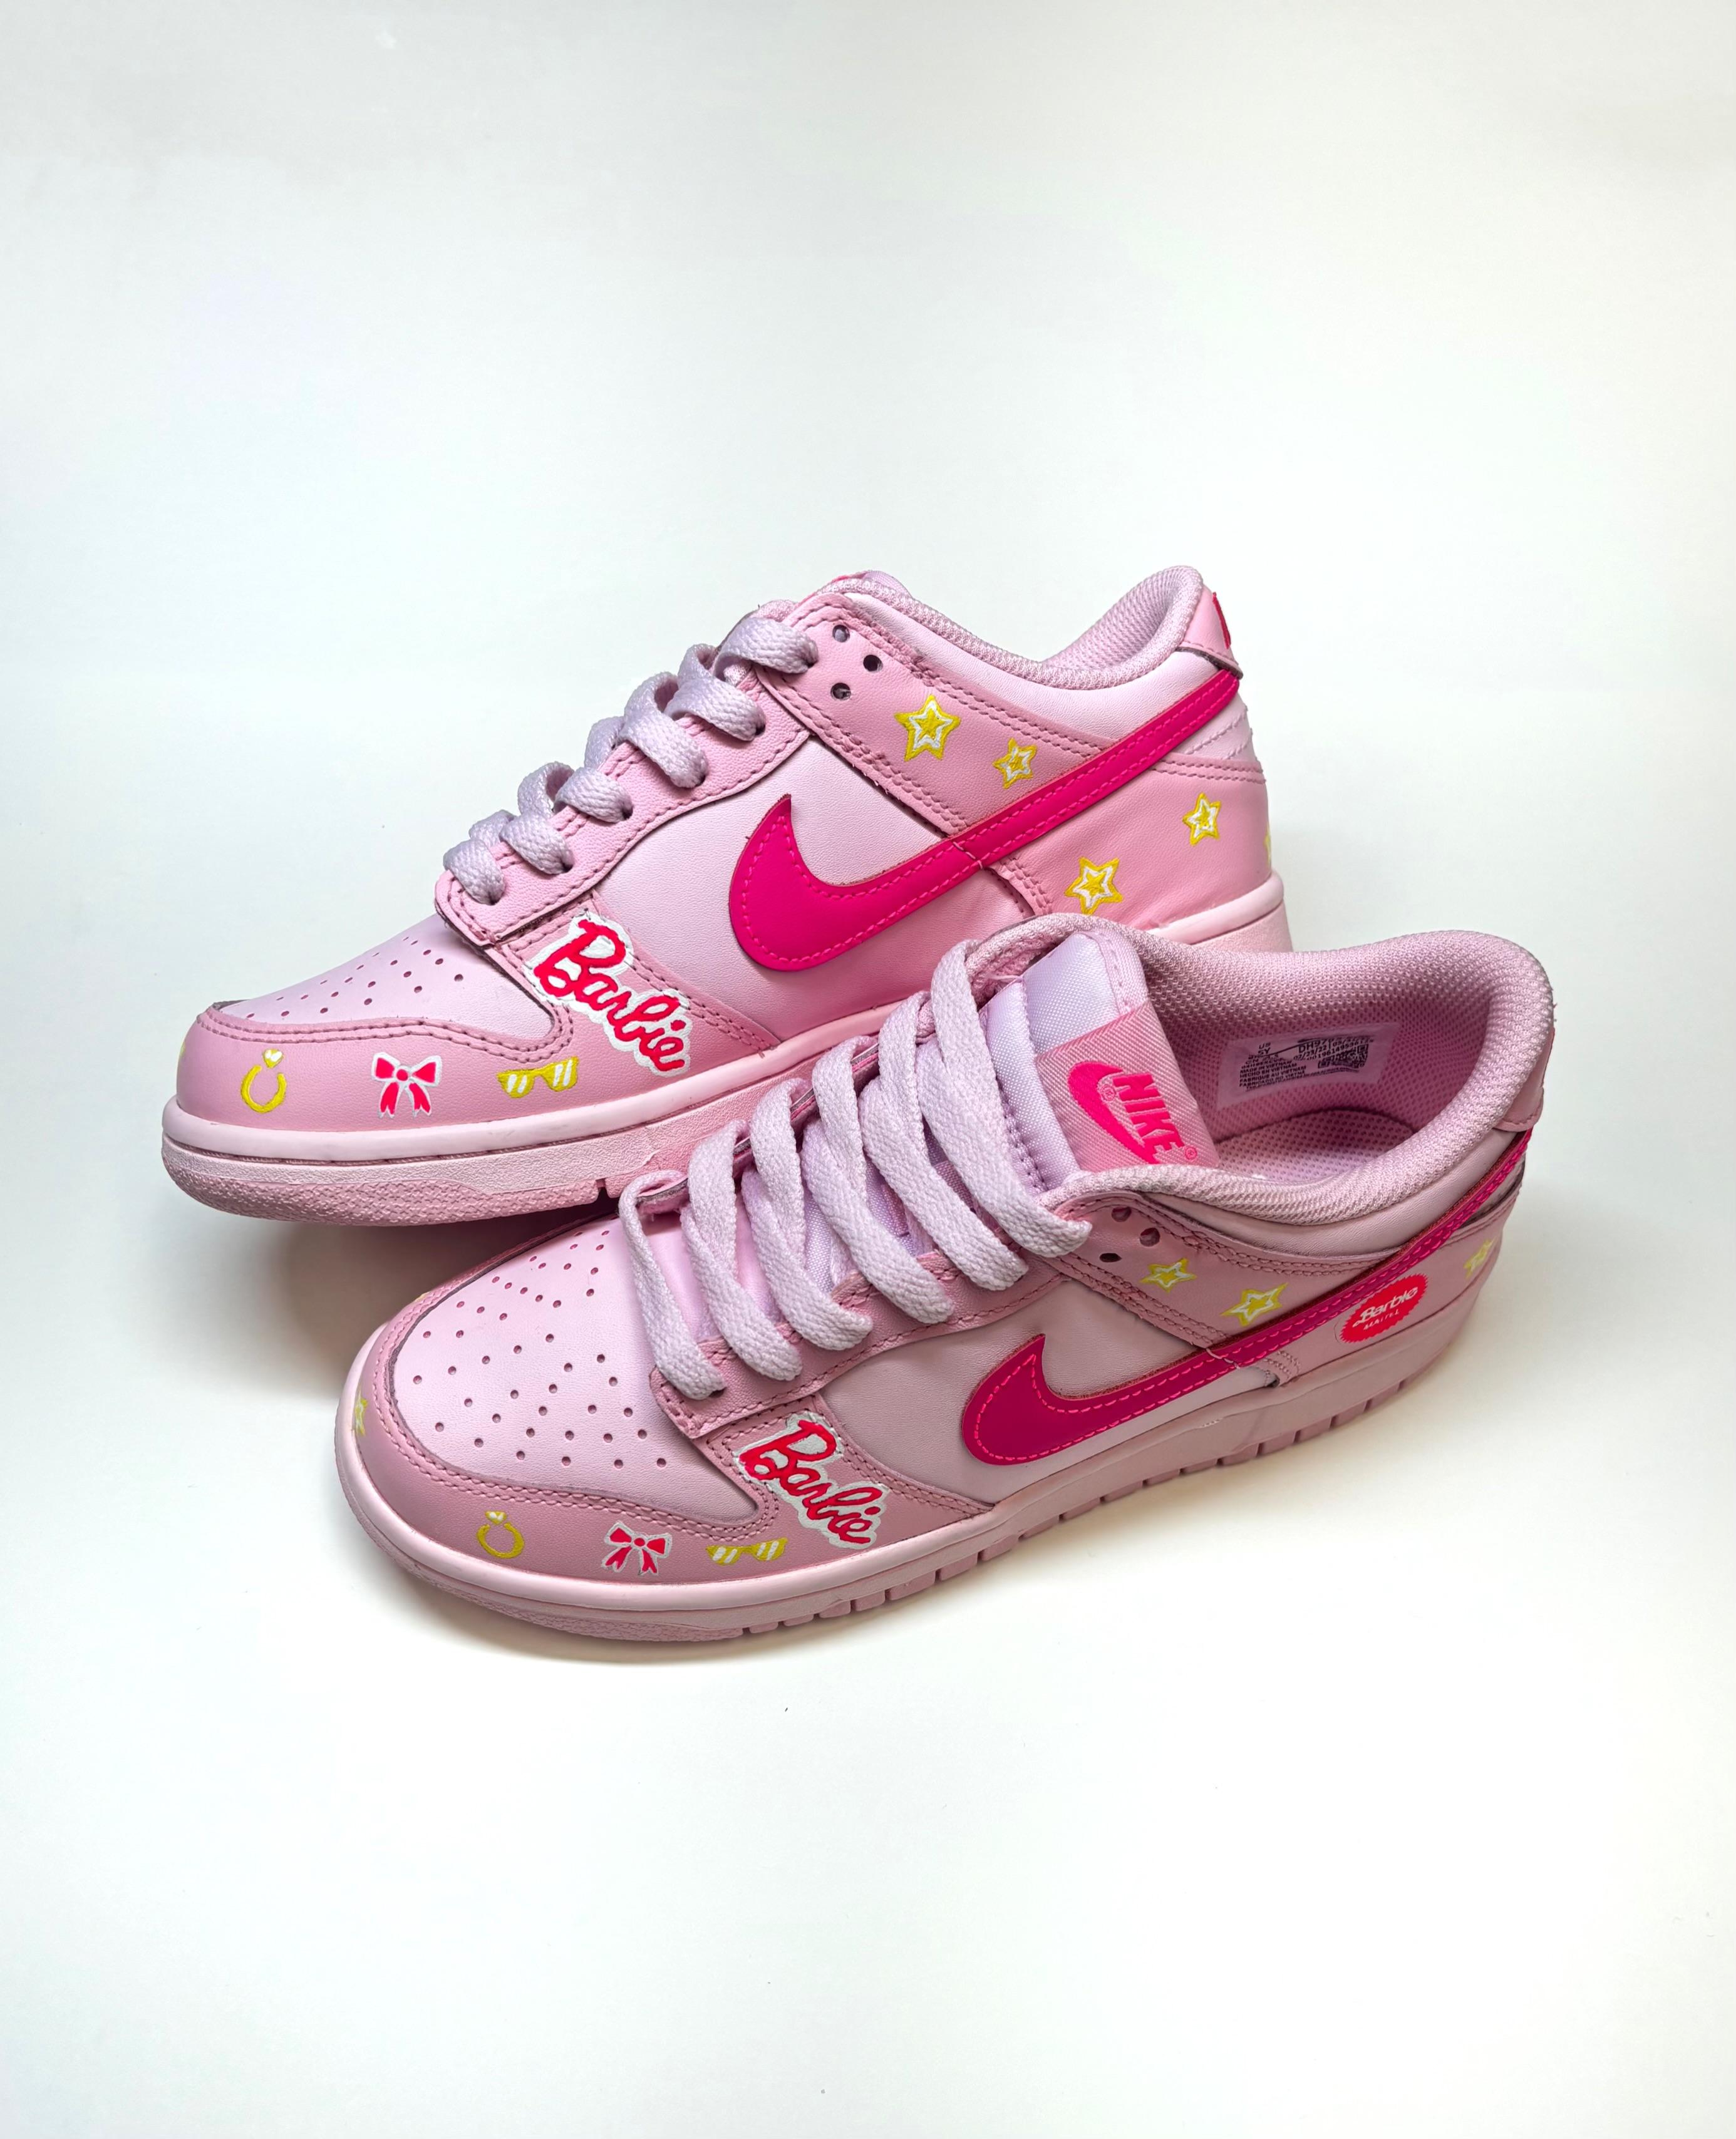 Women's Barbie Custom Hand-Painted Nike Dunk Concept Sneakers by Reed Revesz For Sale